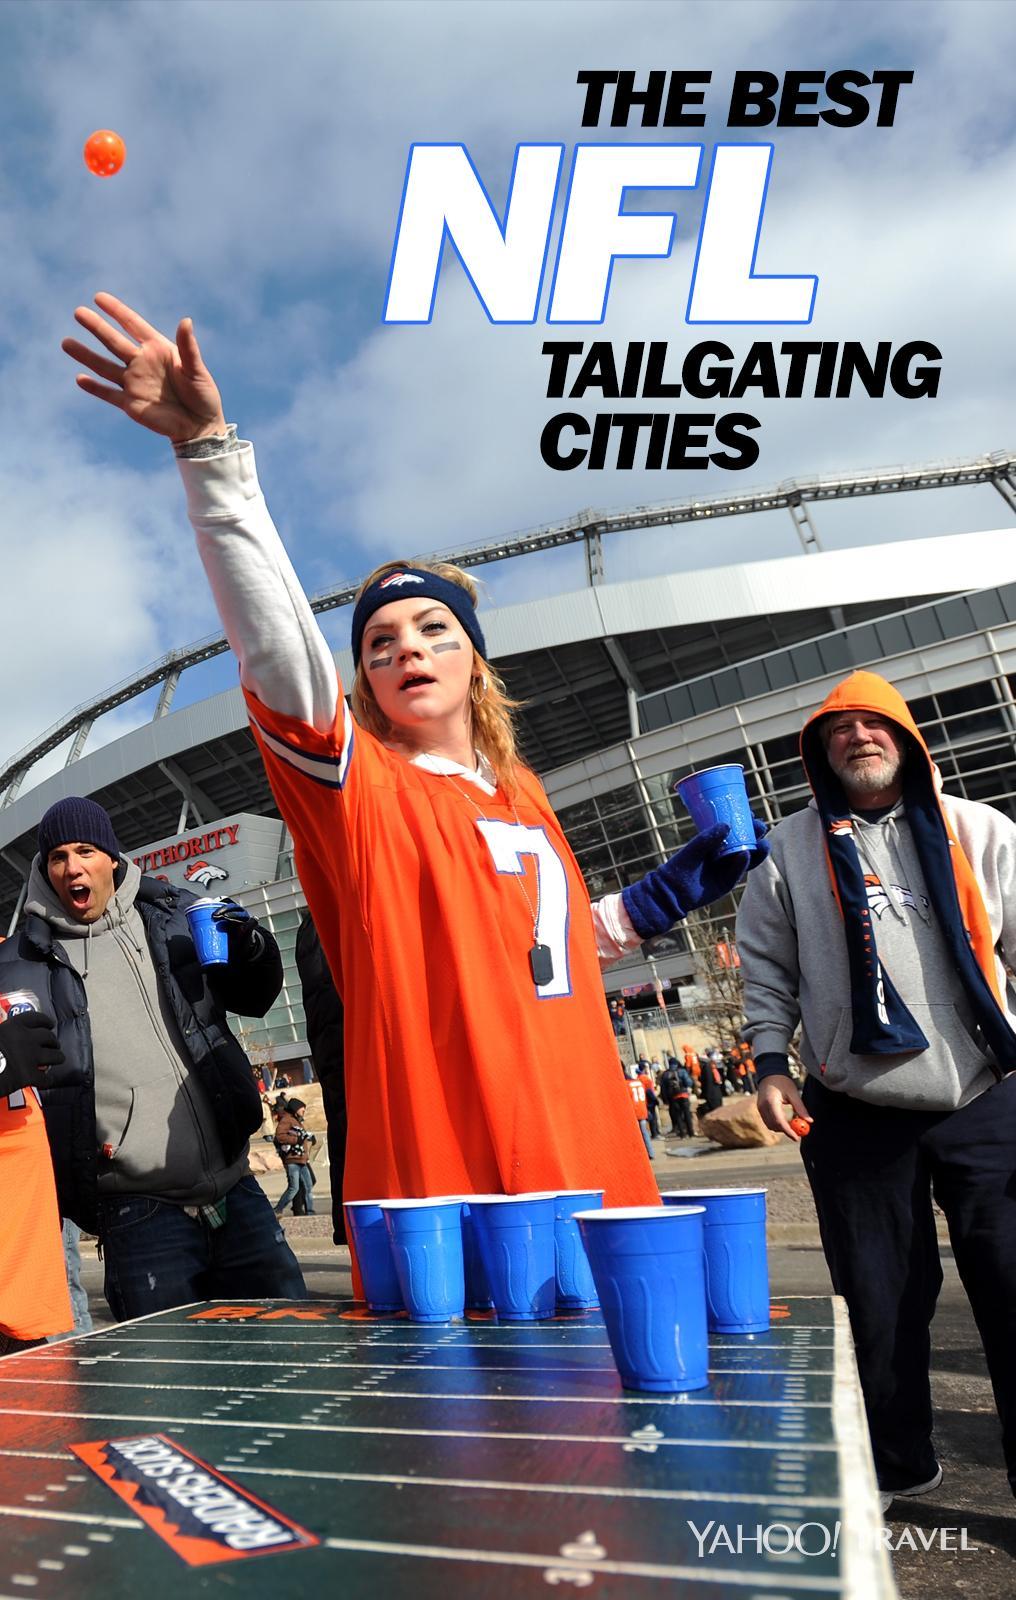 7 Best NFL Tailgates by Team - What is a Tailgate Party?